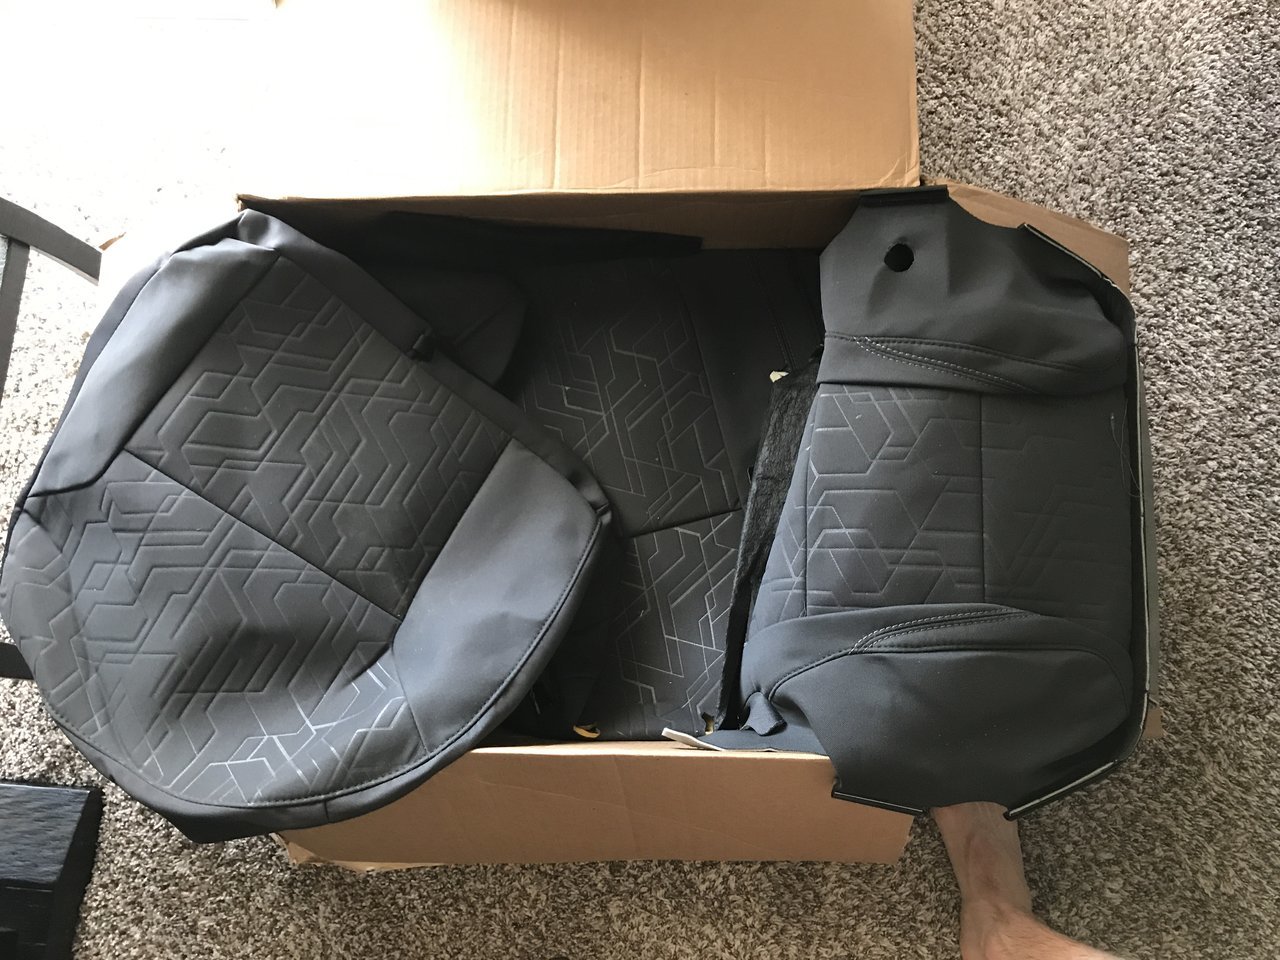 FS: TRD Off Road OEM seat covers | Tacoma World 2018 Toyota Tacoma Trd Off Road Seat Covers